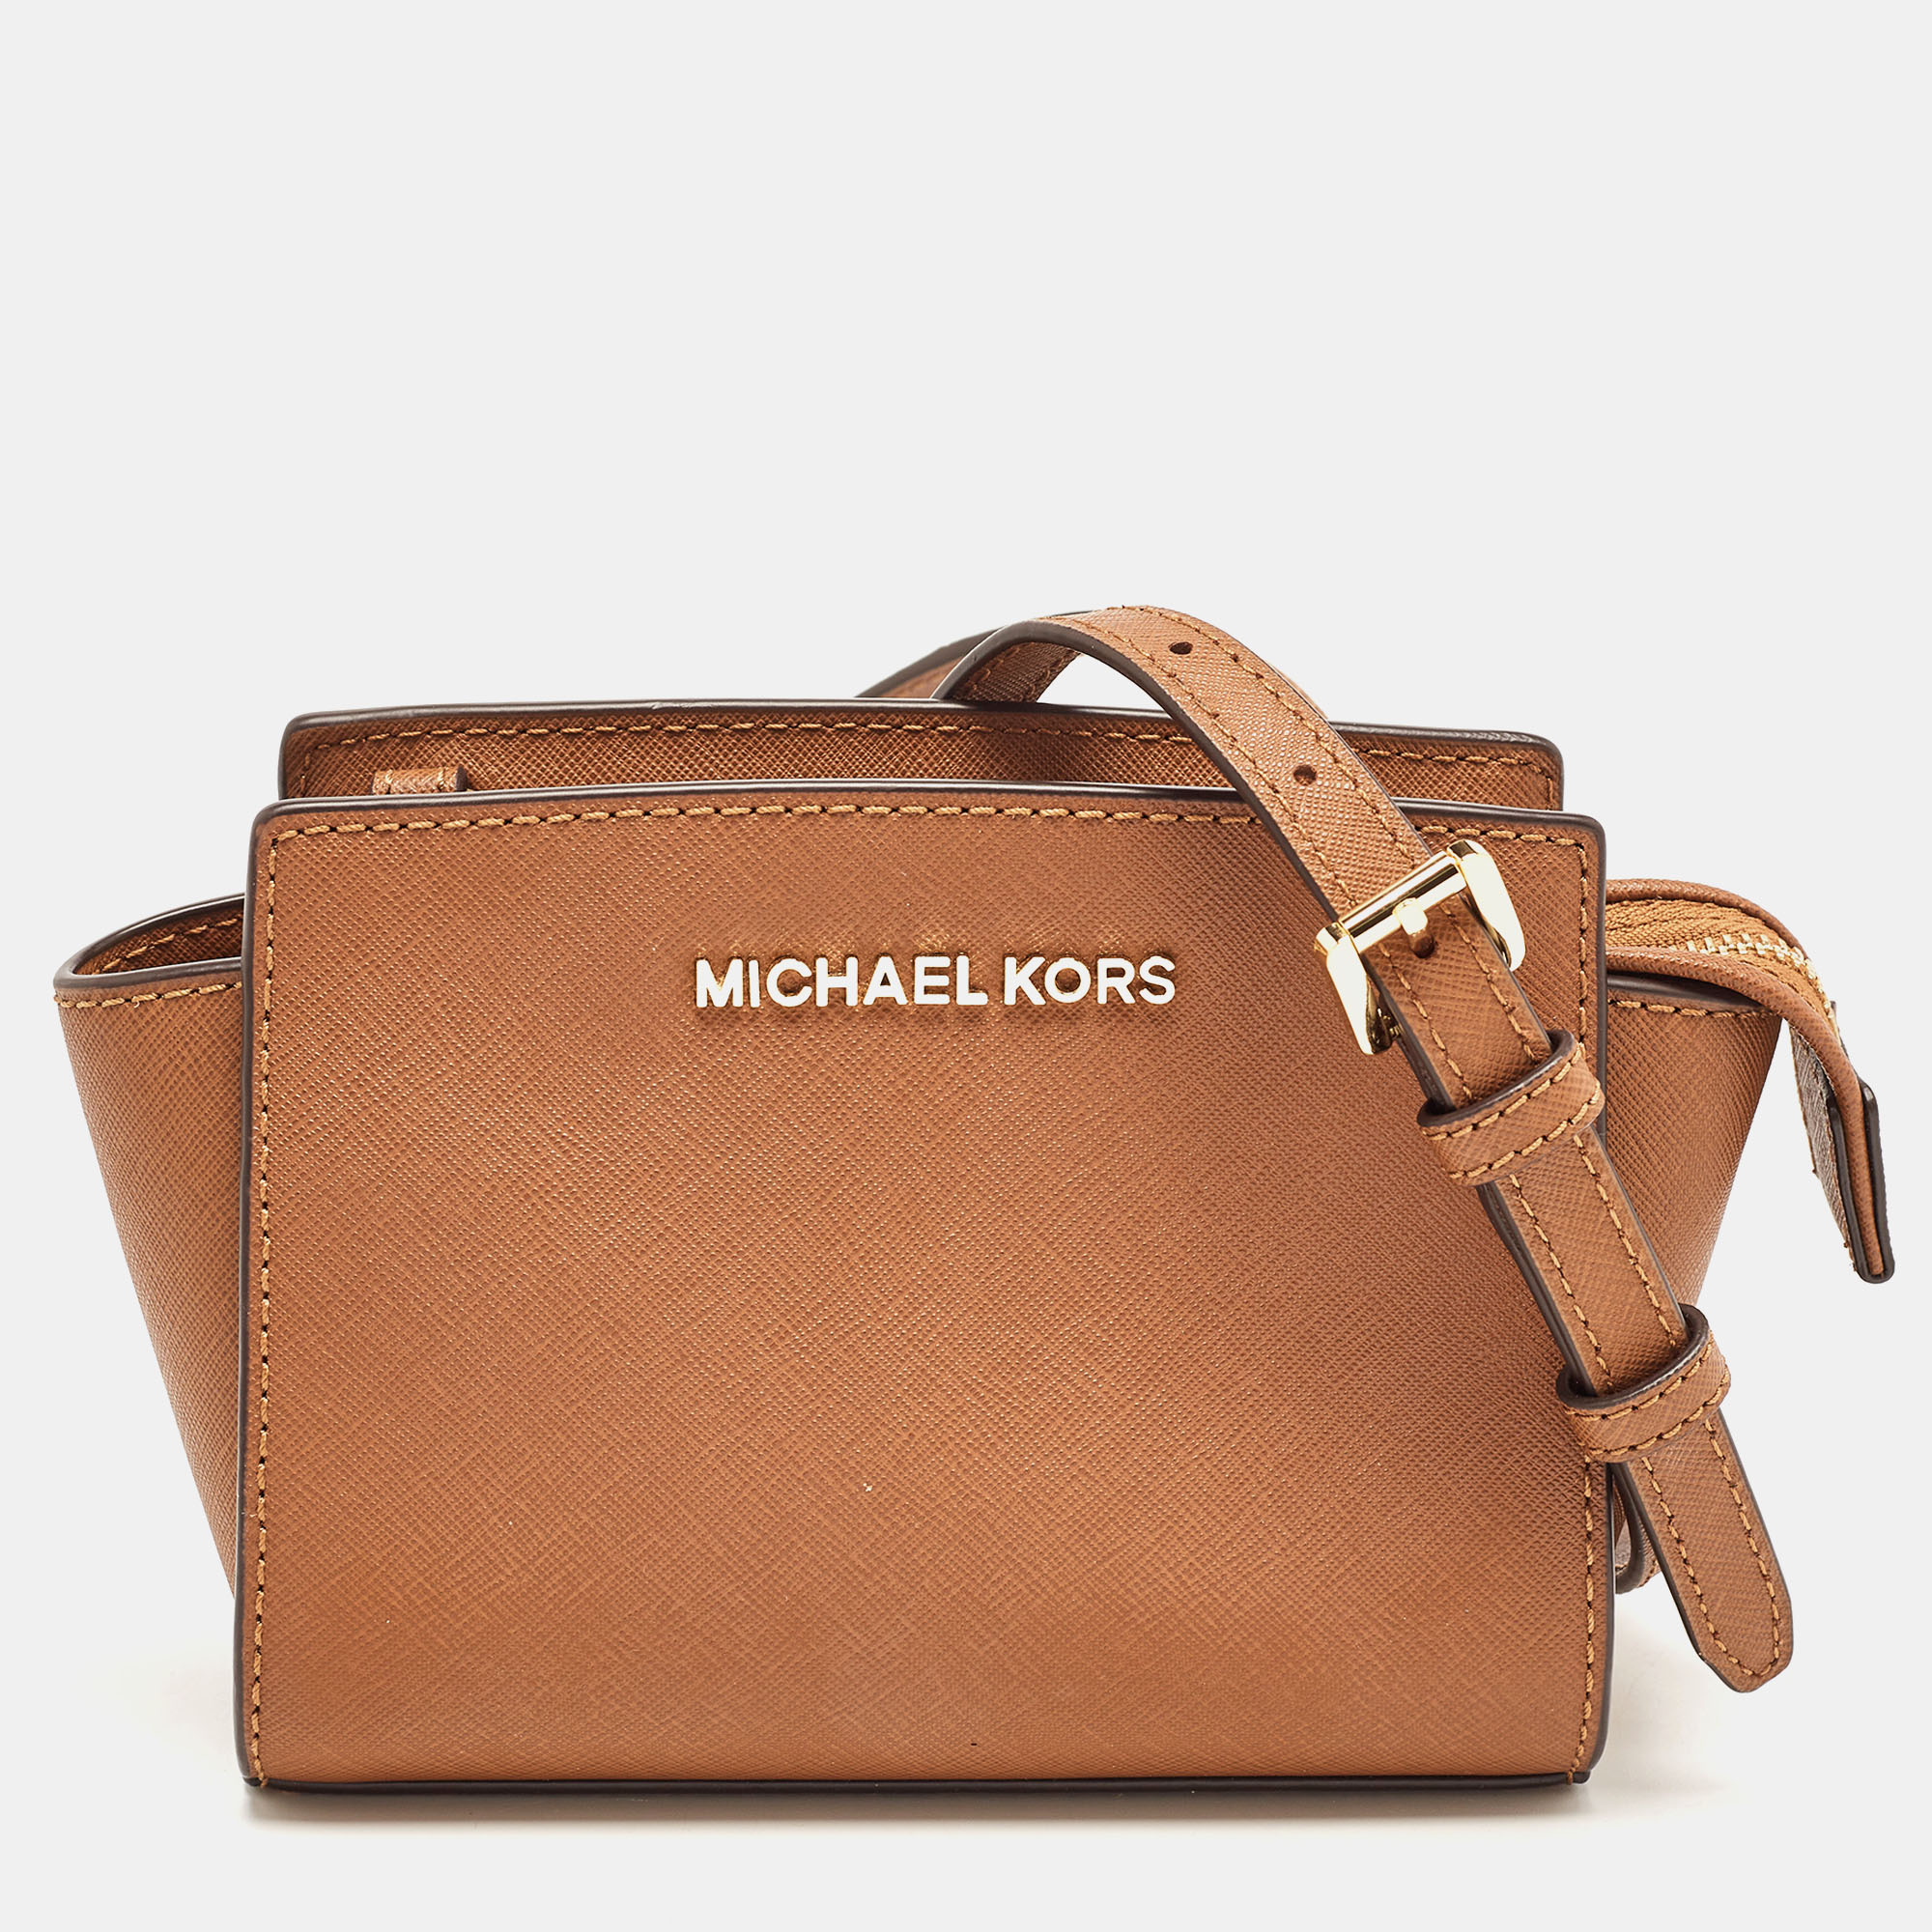 This mini Selma crossbody bag from Michael Kors is a stunning creation. It is designed using brown leather on the exterior and features a gold toned logo accent on the front and a shoulder strap. It is equipped with a fabric lined interior.